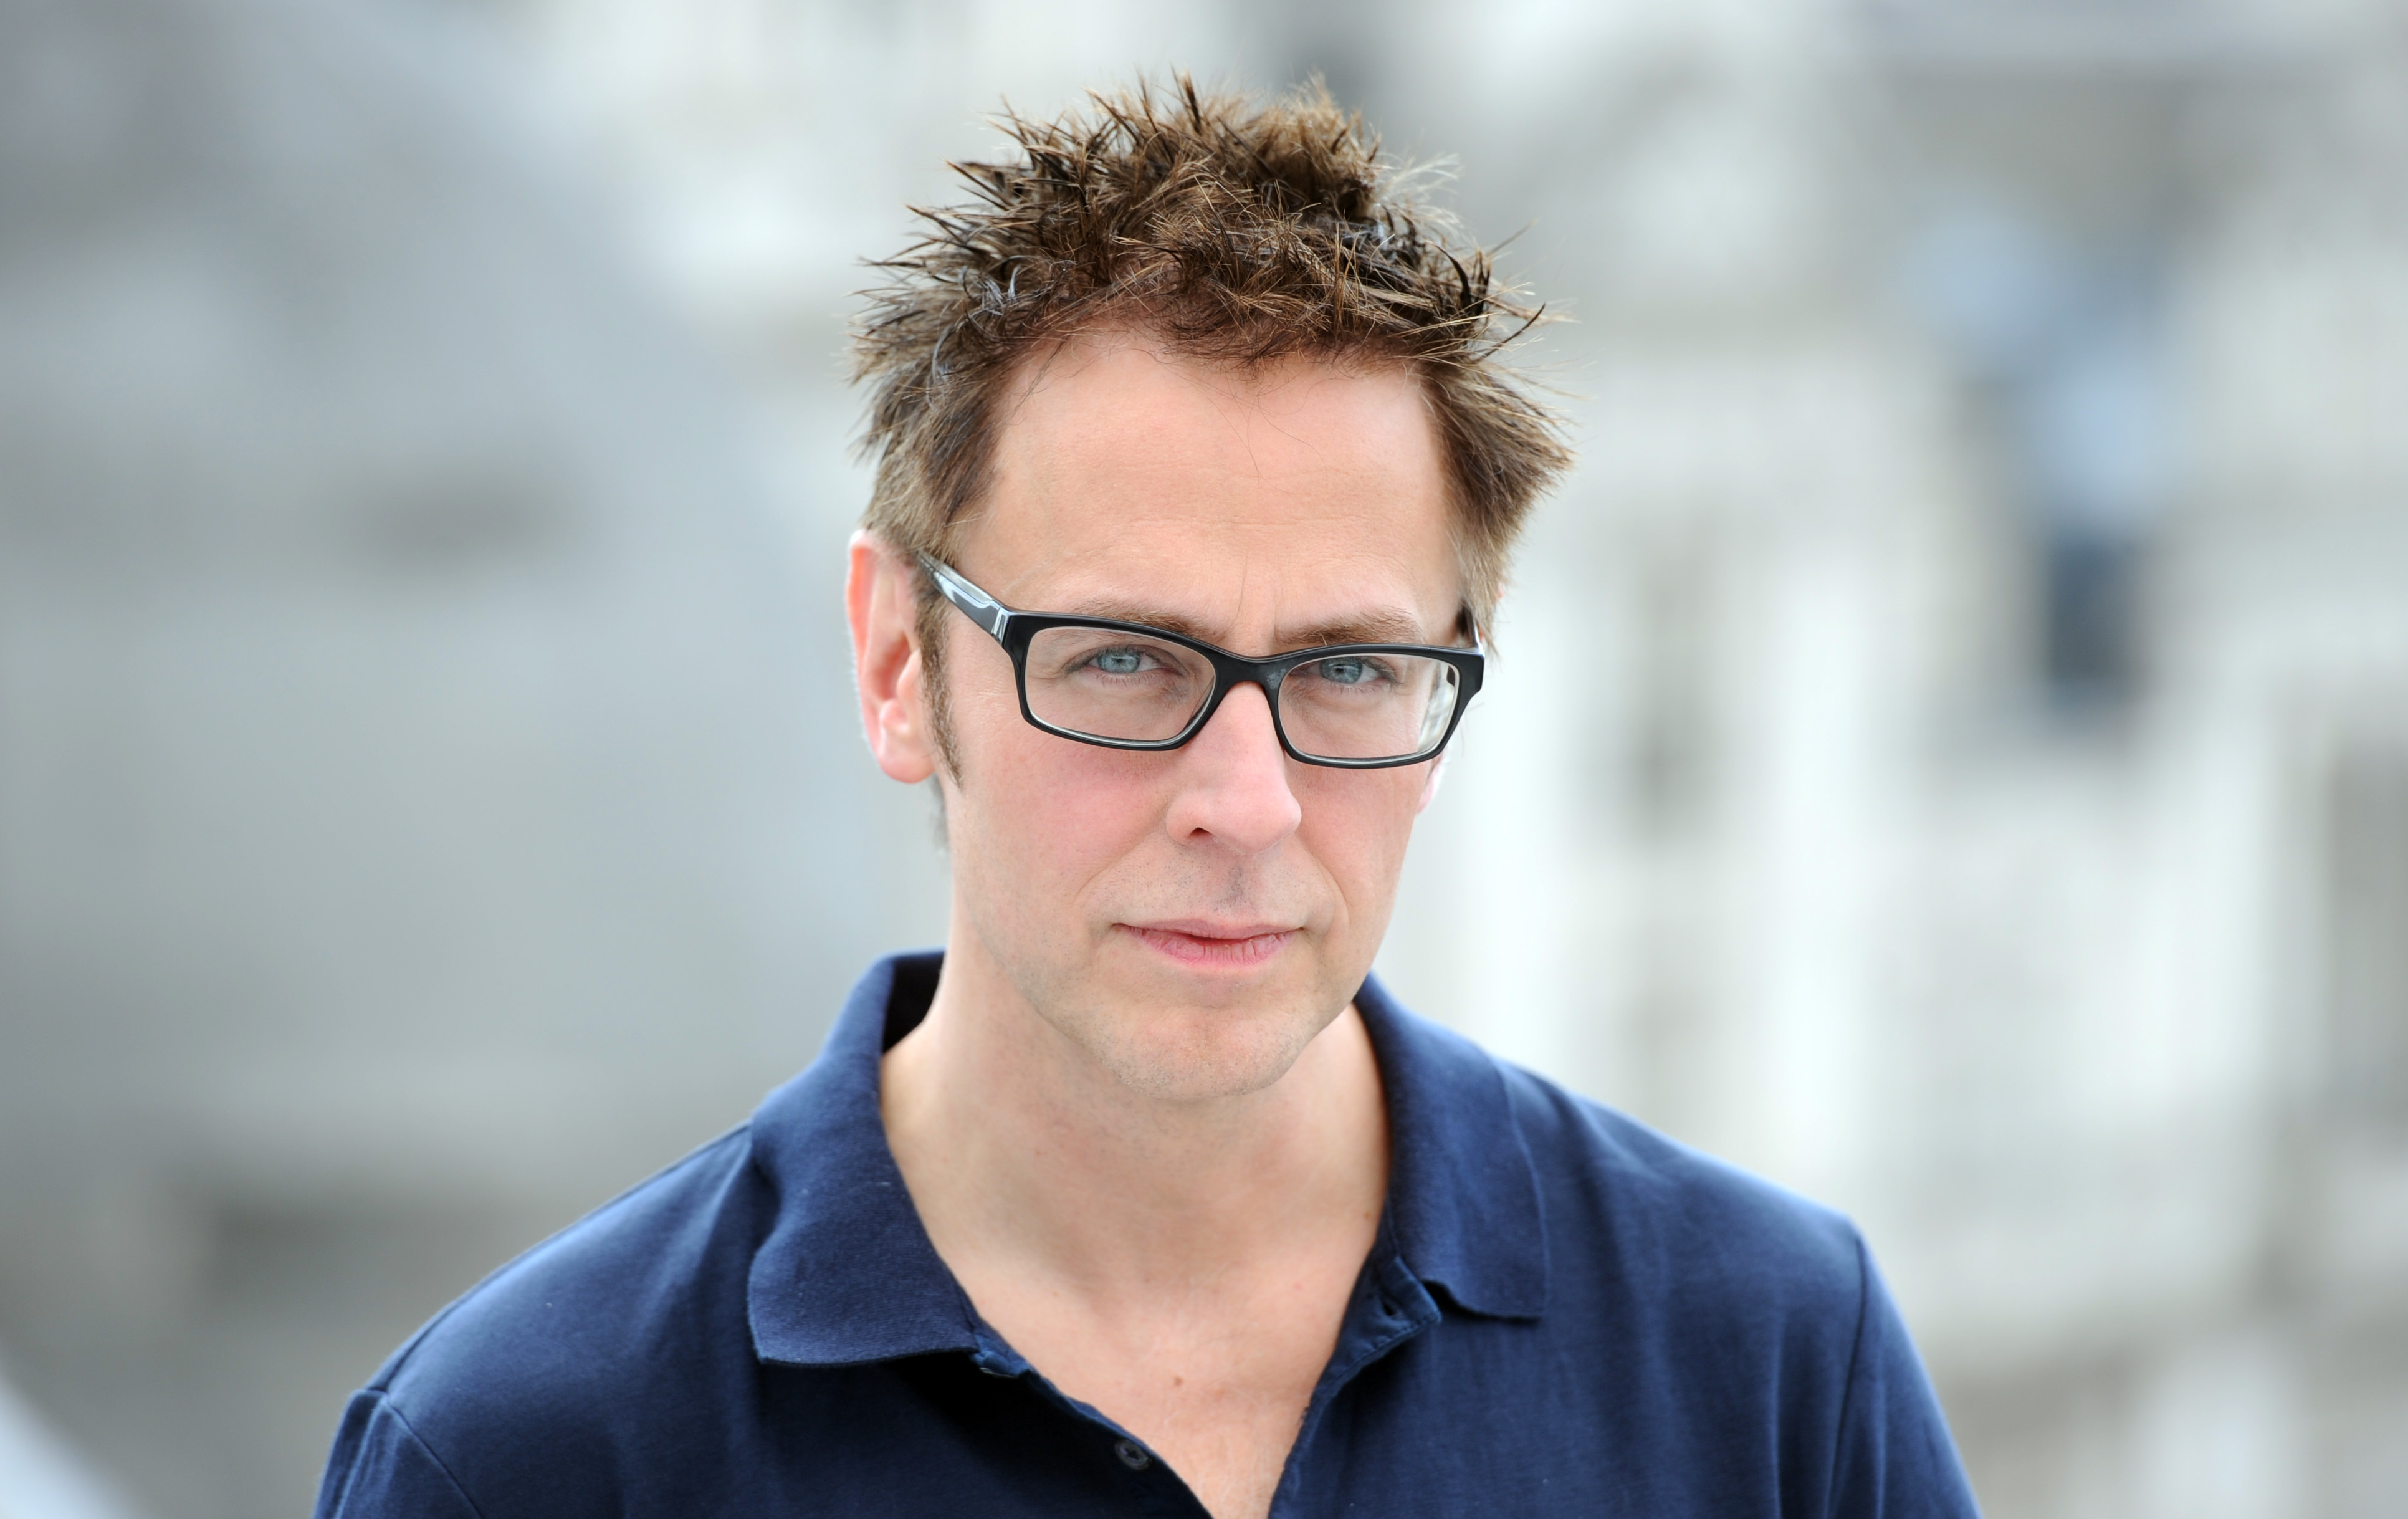 James Gunn: 'The Suicide Squad' Politics and Getting 'Fired' by Disney